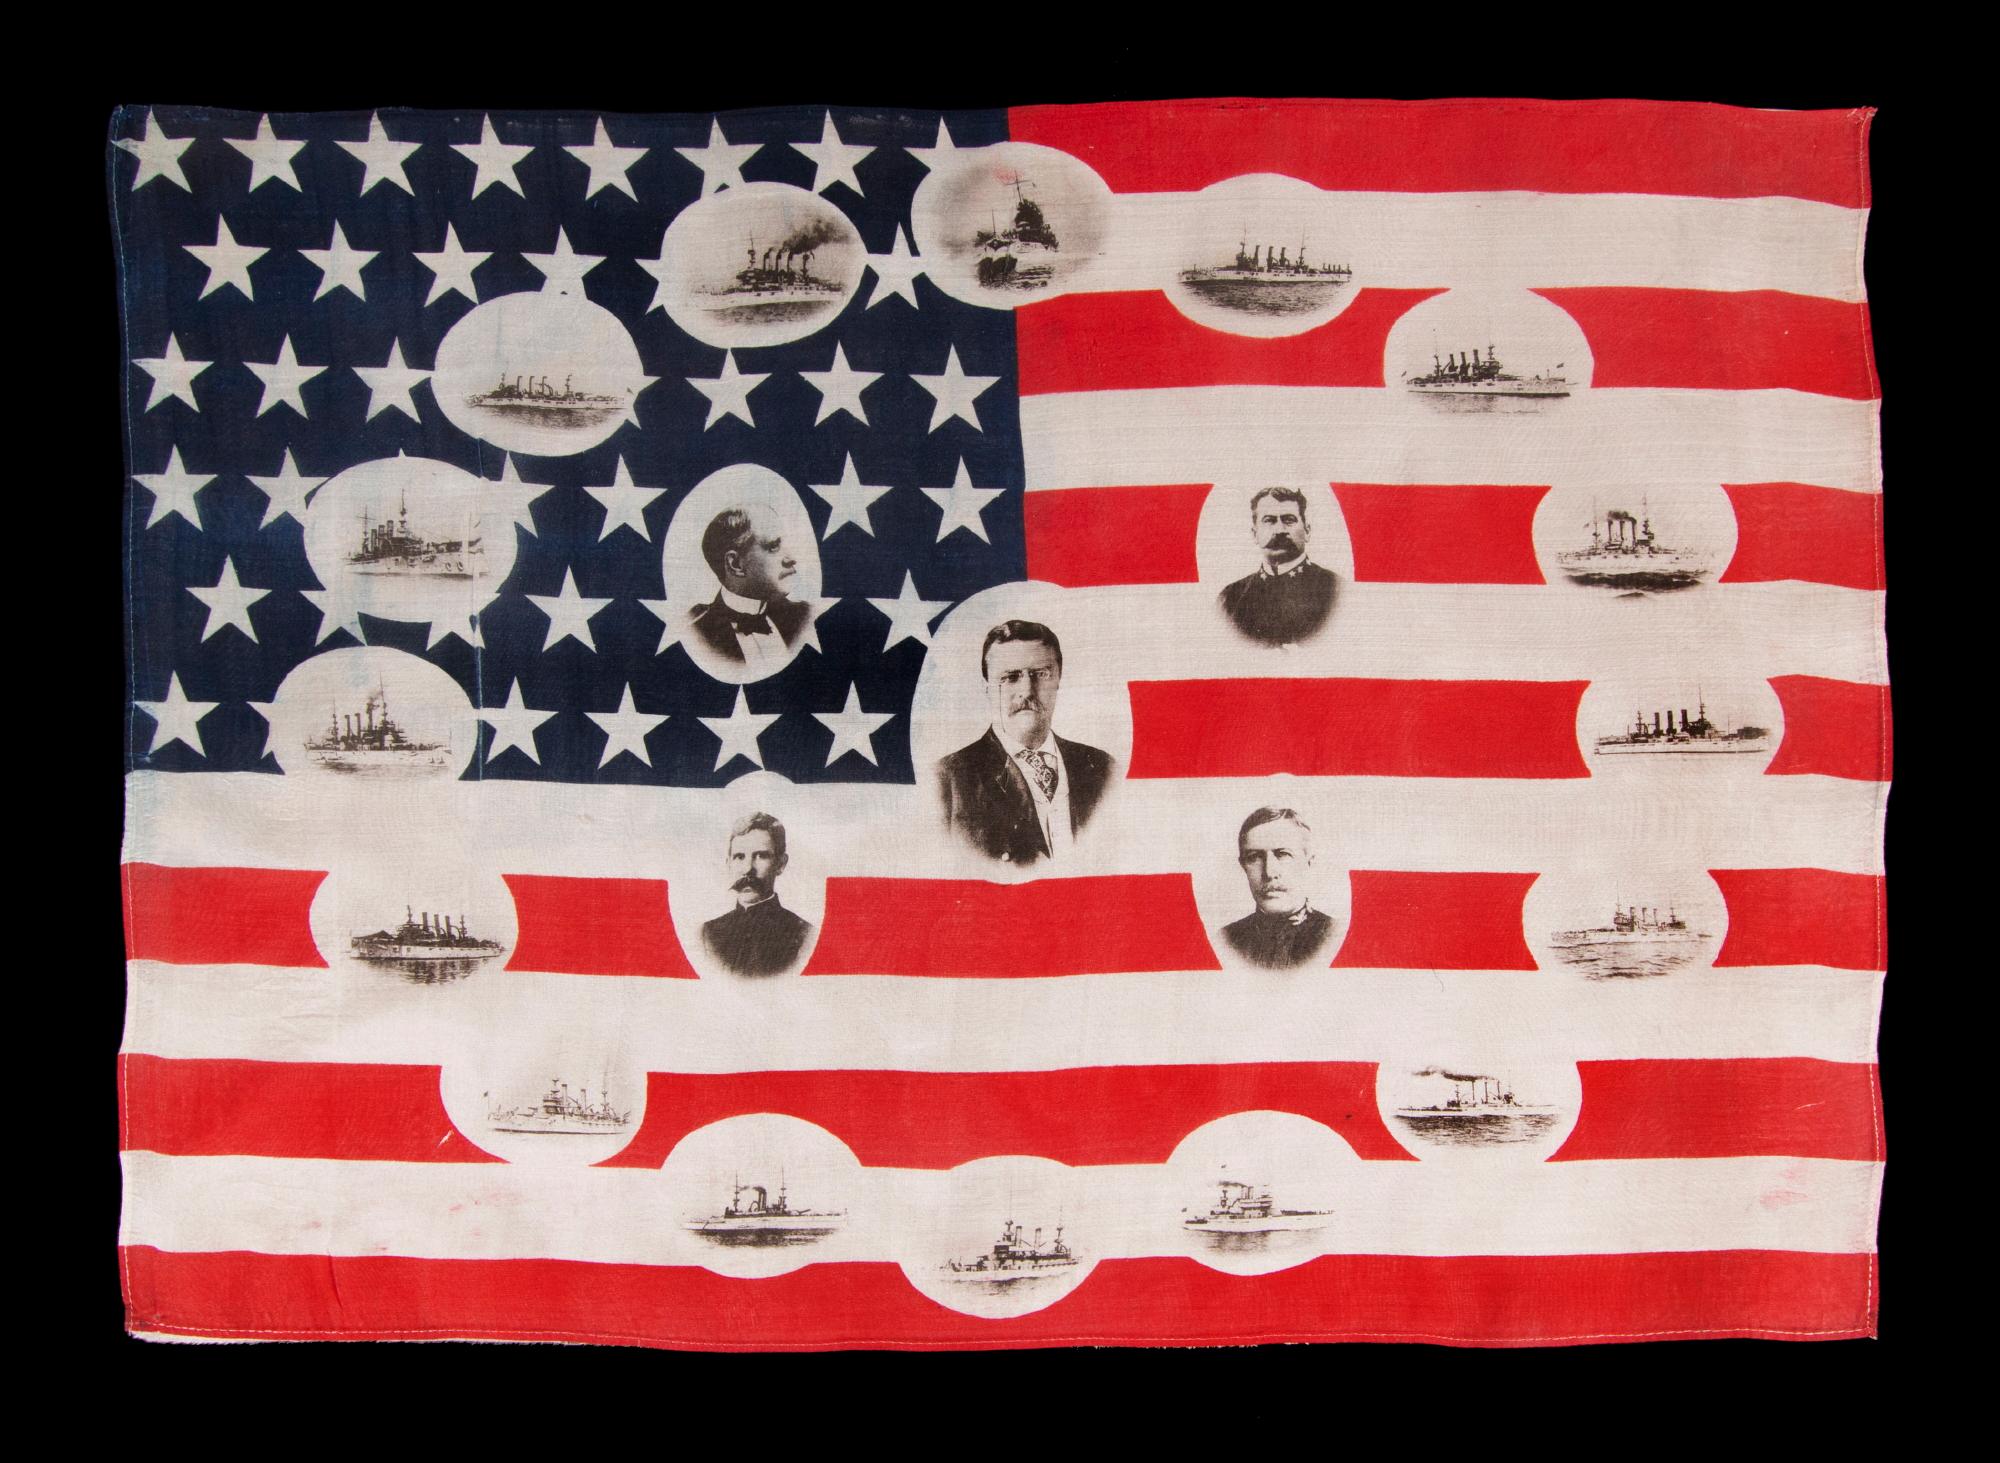 Rare & Beautiful American Parade Flag With Images Of Teddy Roosevelt And His Great White Fleet, 1907-1909, Ex-richard Pierce Collection:

46 star parade flag, printed on very fine silk, made to celebrate the launch of Teddy Roosevelt’s Great White